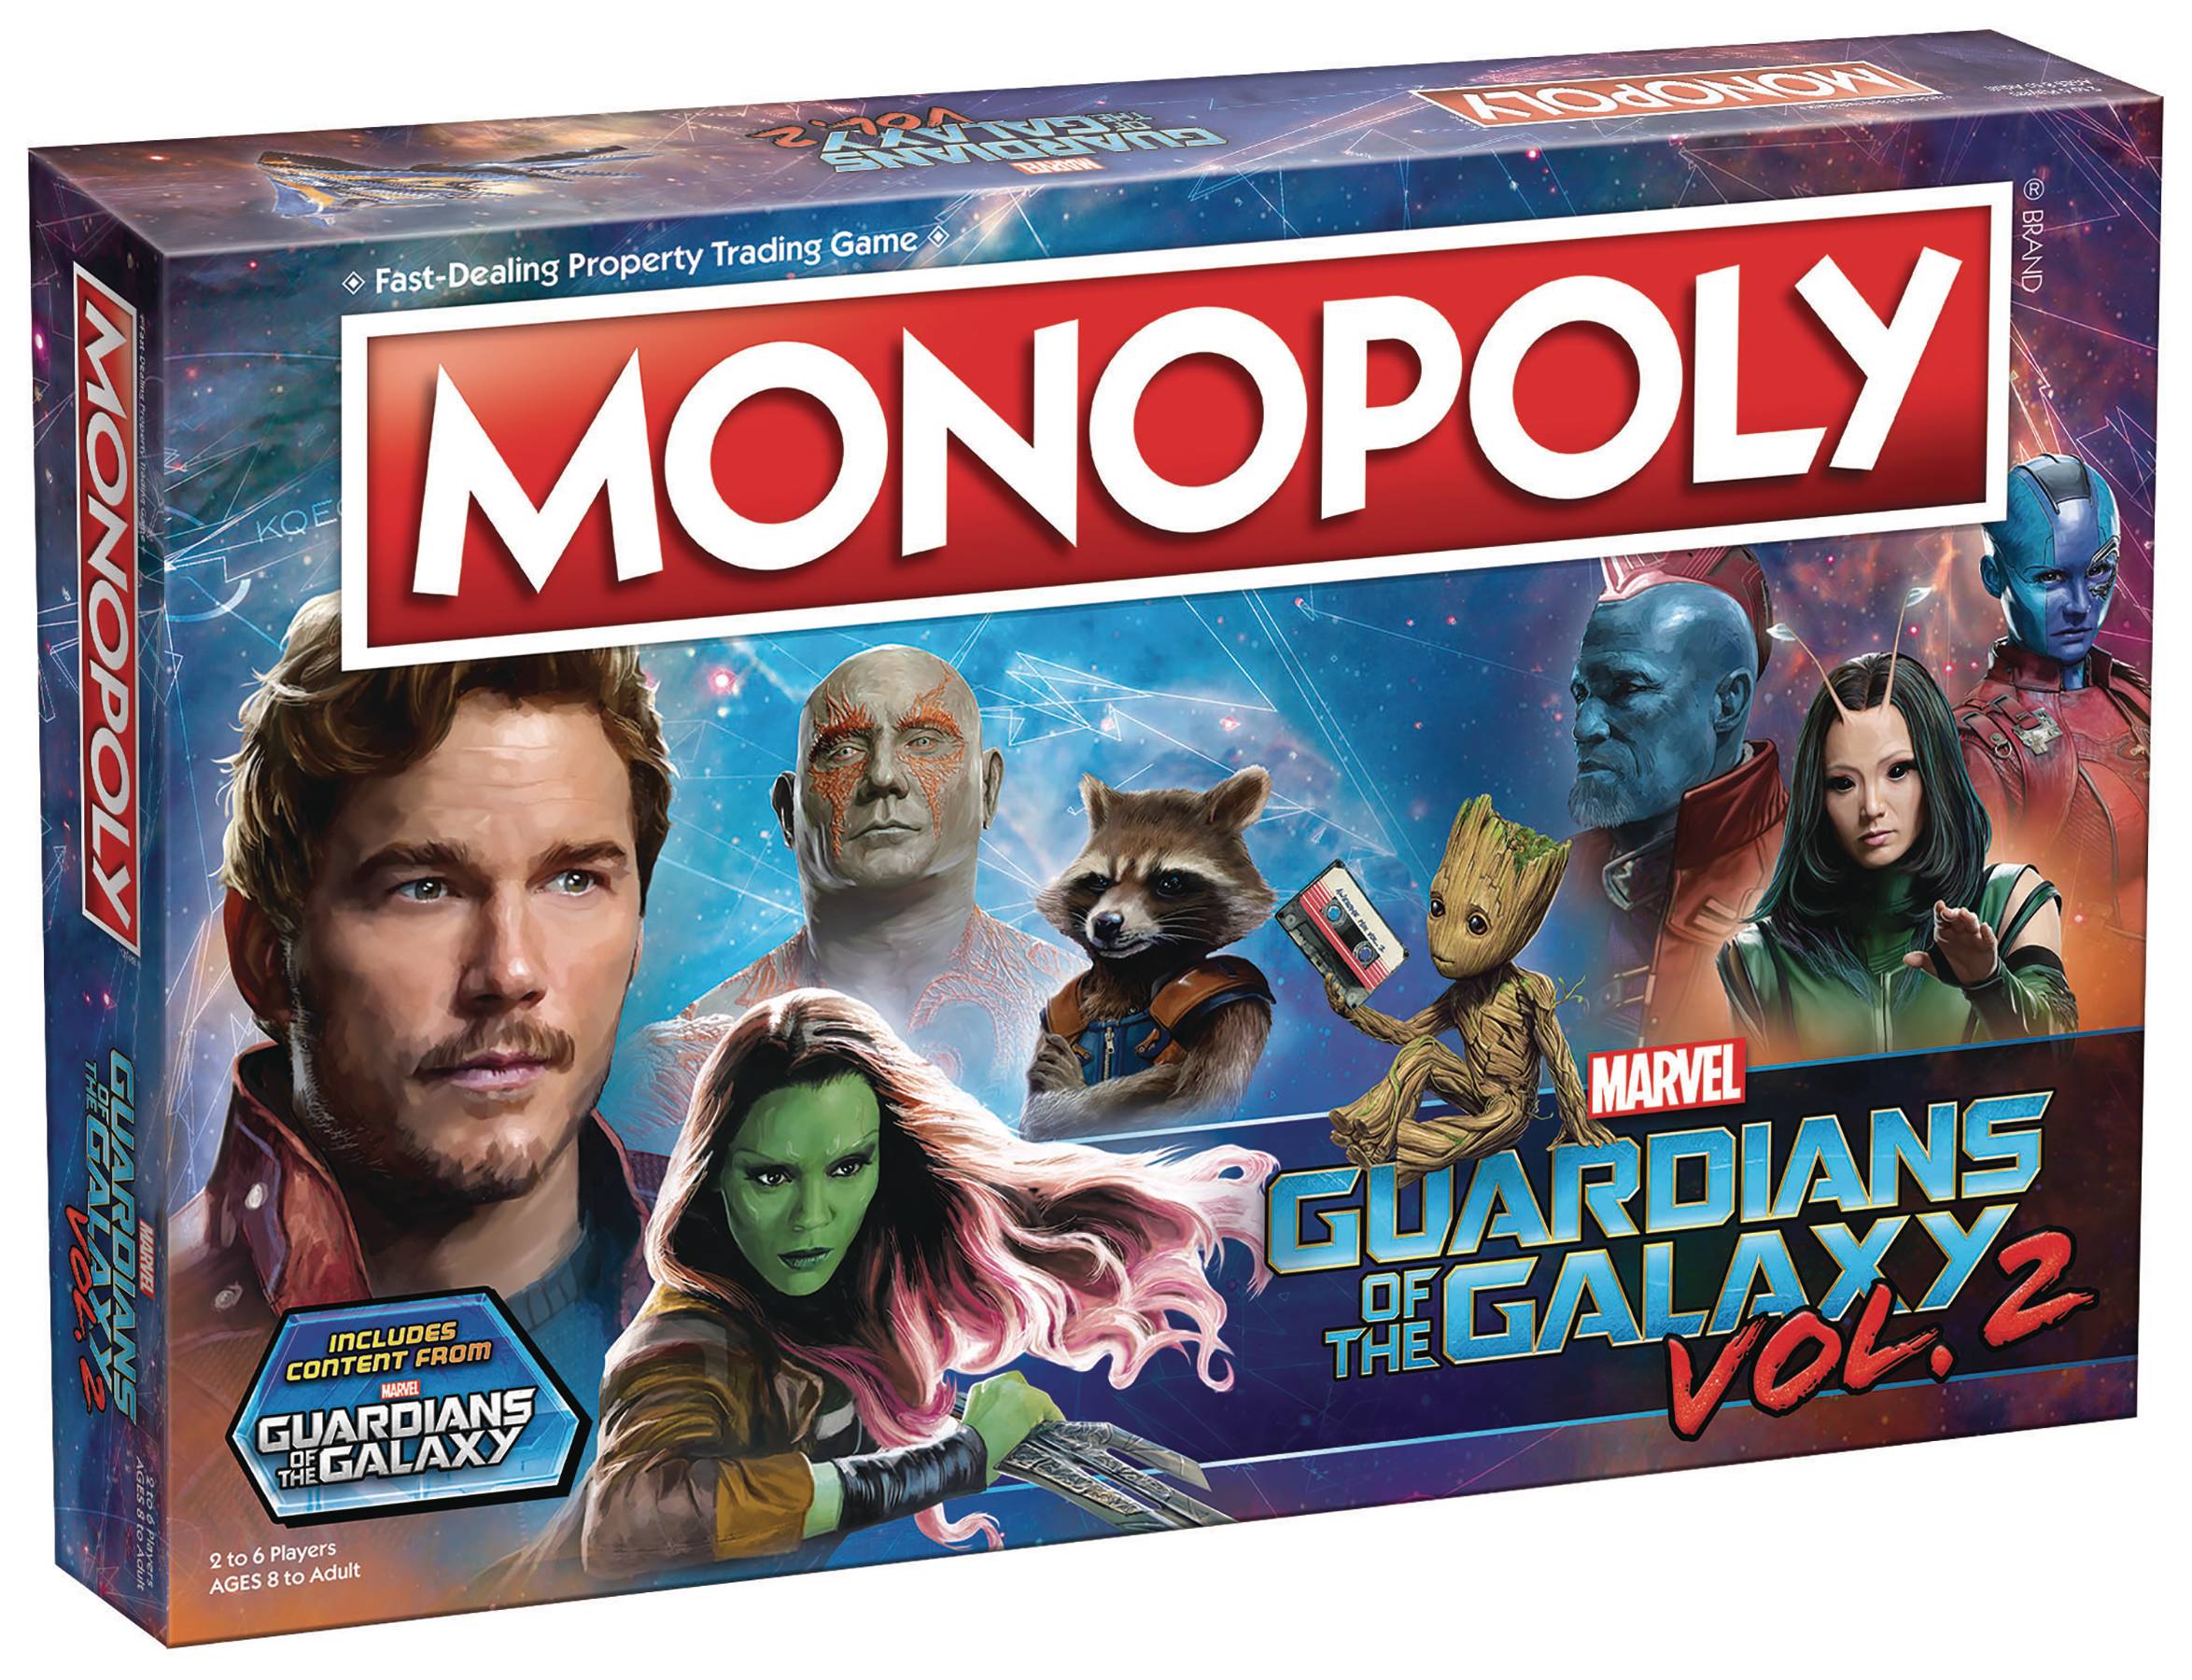 Guardians of the Galaxy Volume 2 Monopoly